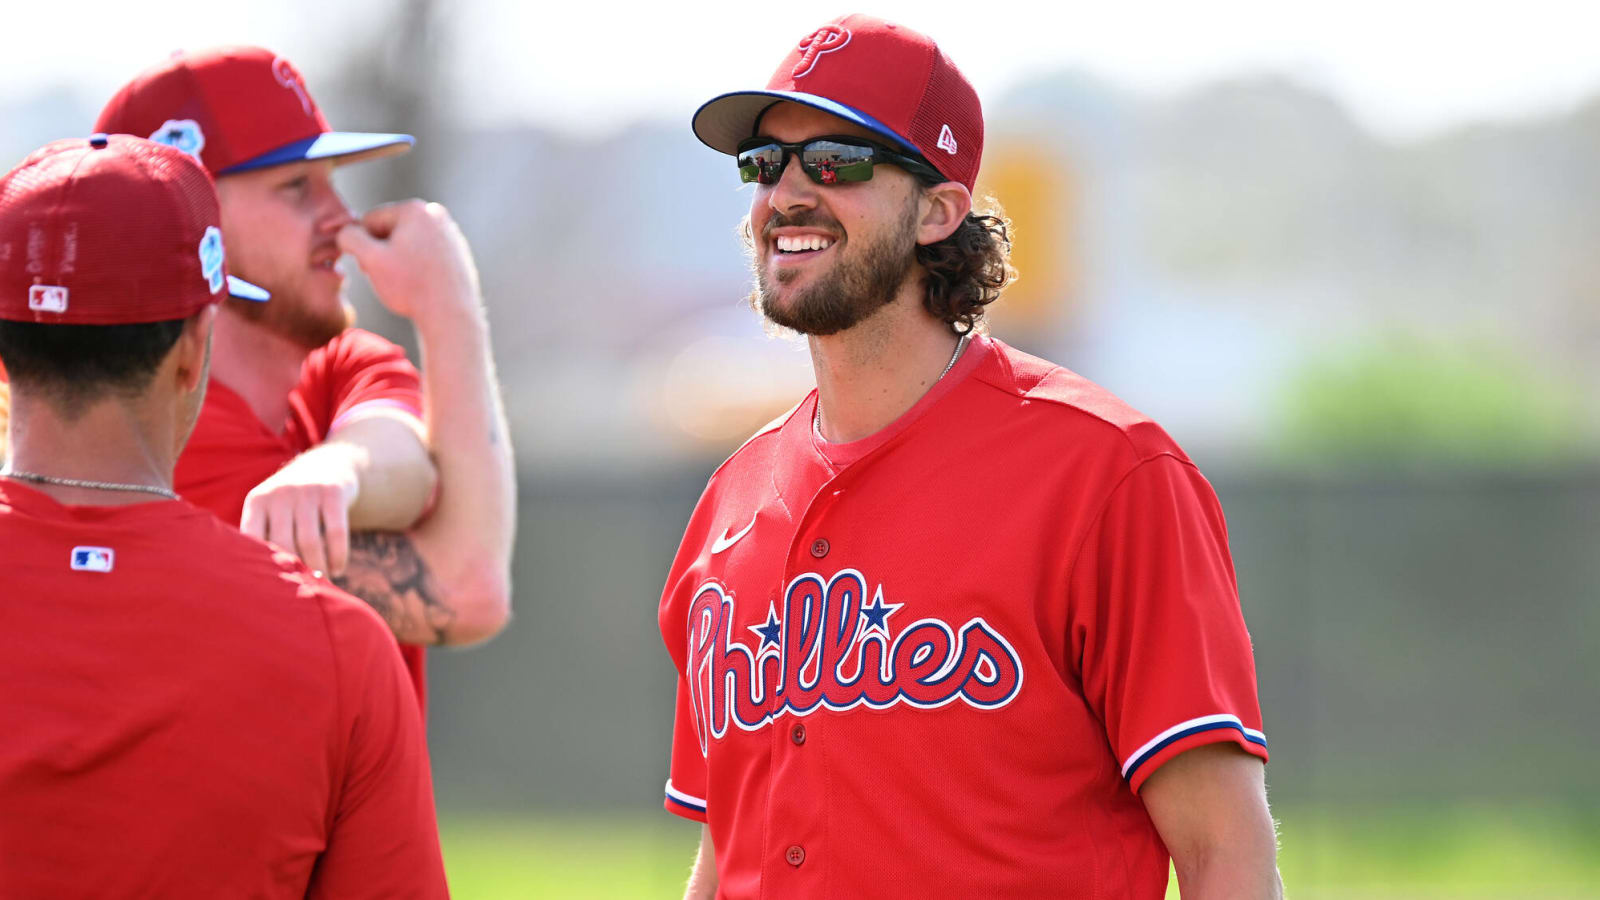 Phillies' Nola discusses another great start